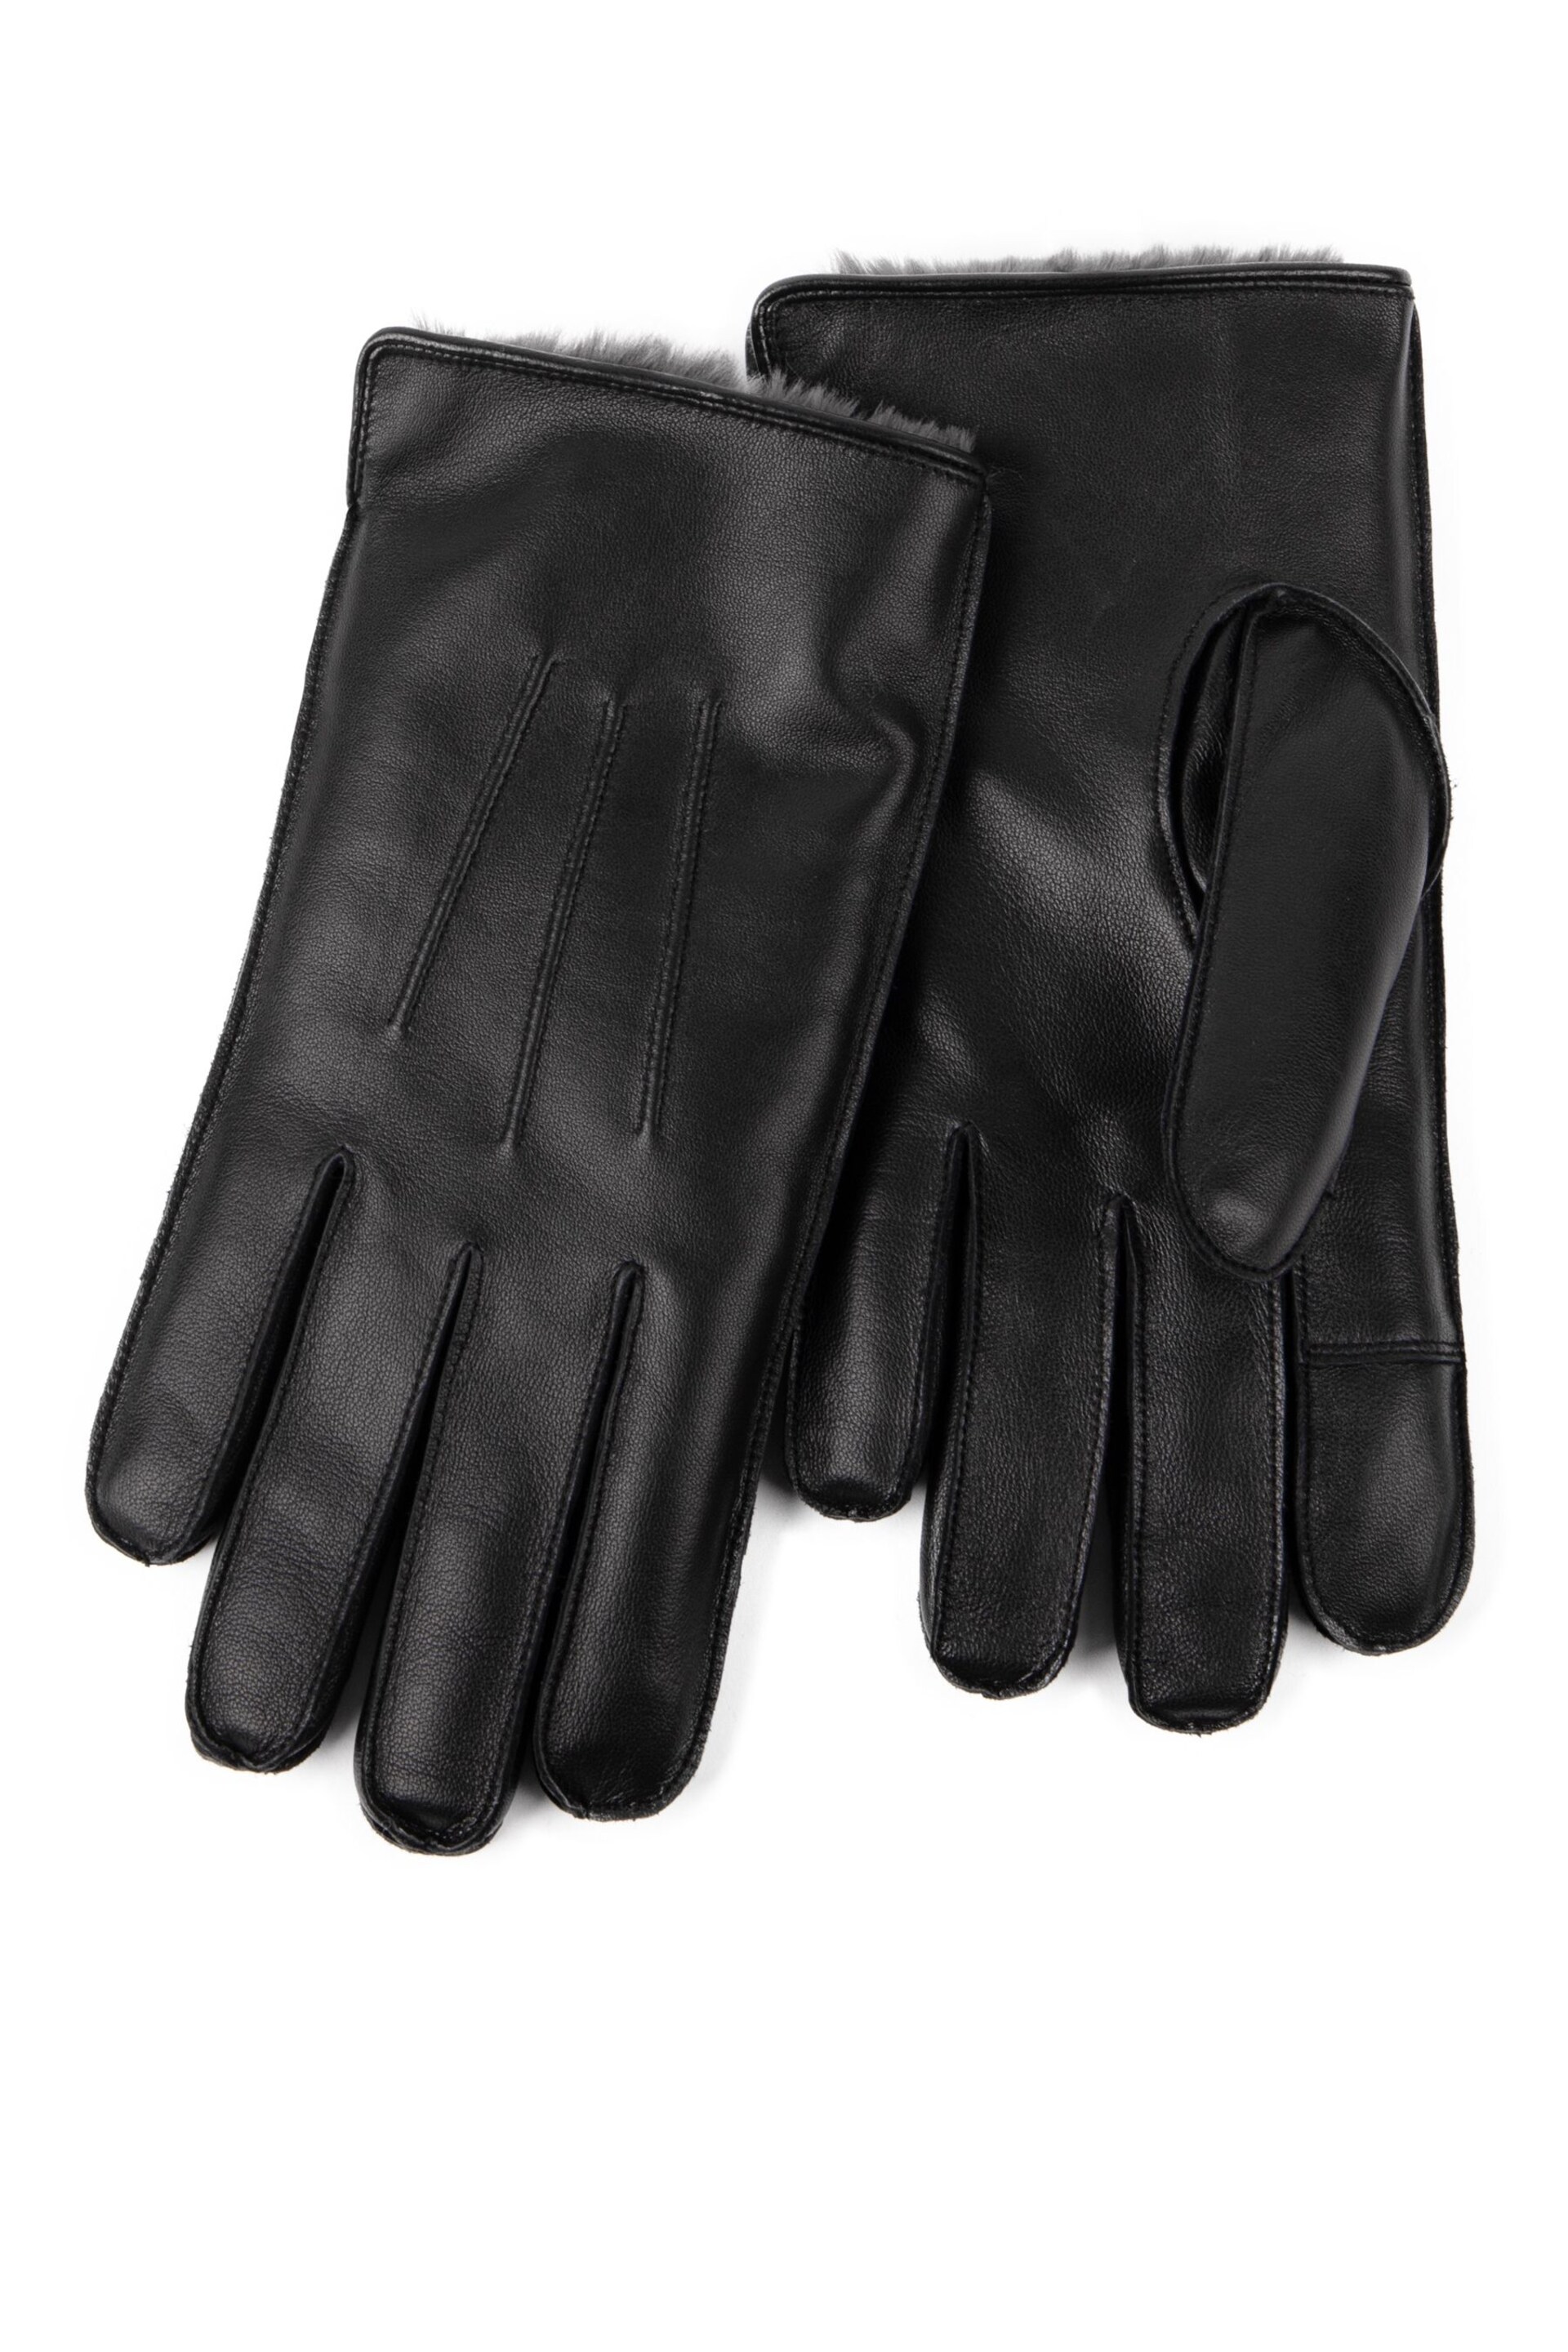 Totes Black Isotoner Mens Premium 3 Point Leather Gloves With Faux Fur Lining - Image 2 of 2